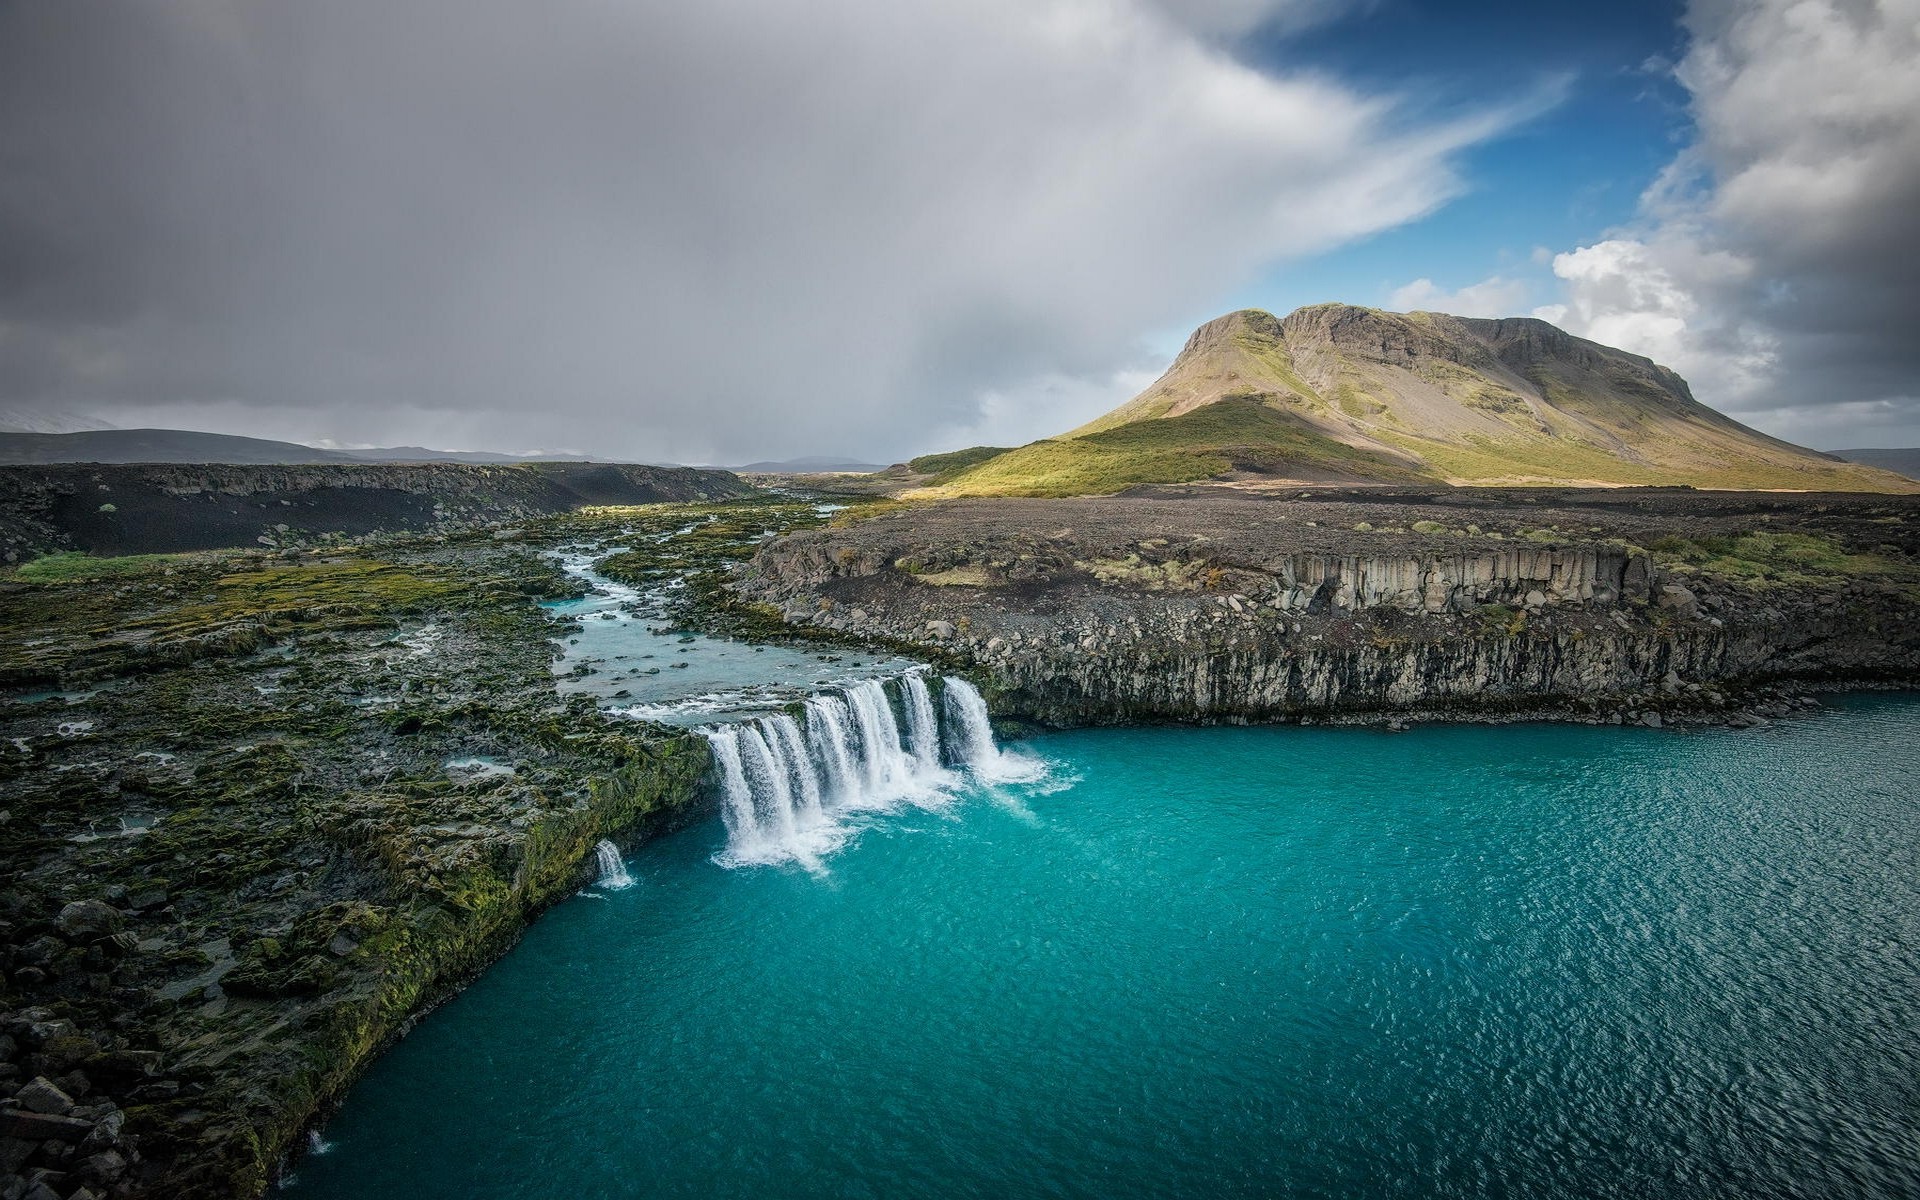 landscape, Nature, Waterfall, Iceland, River, Mountain, Fall, Turquoise, Water, Clouds, Lava, Field, Cliff, Lake Wallpaper